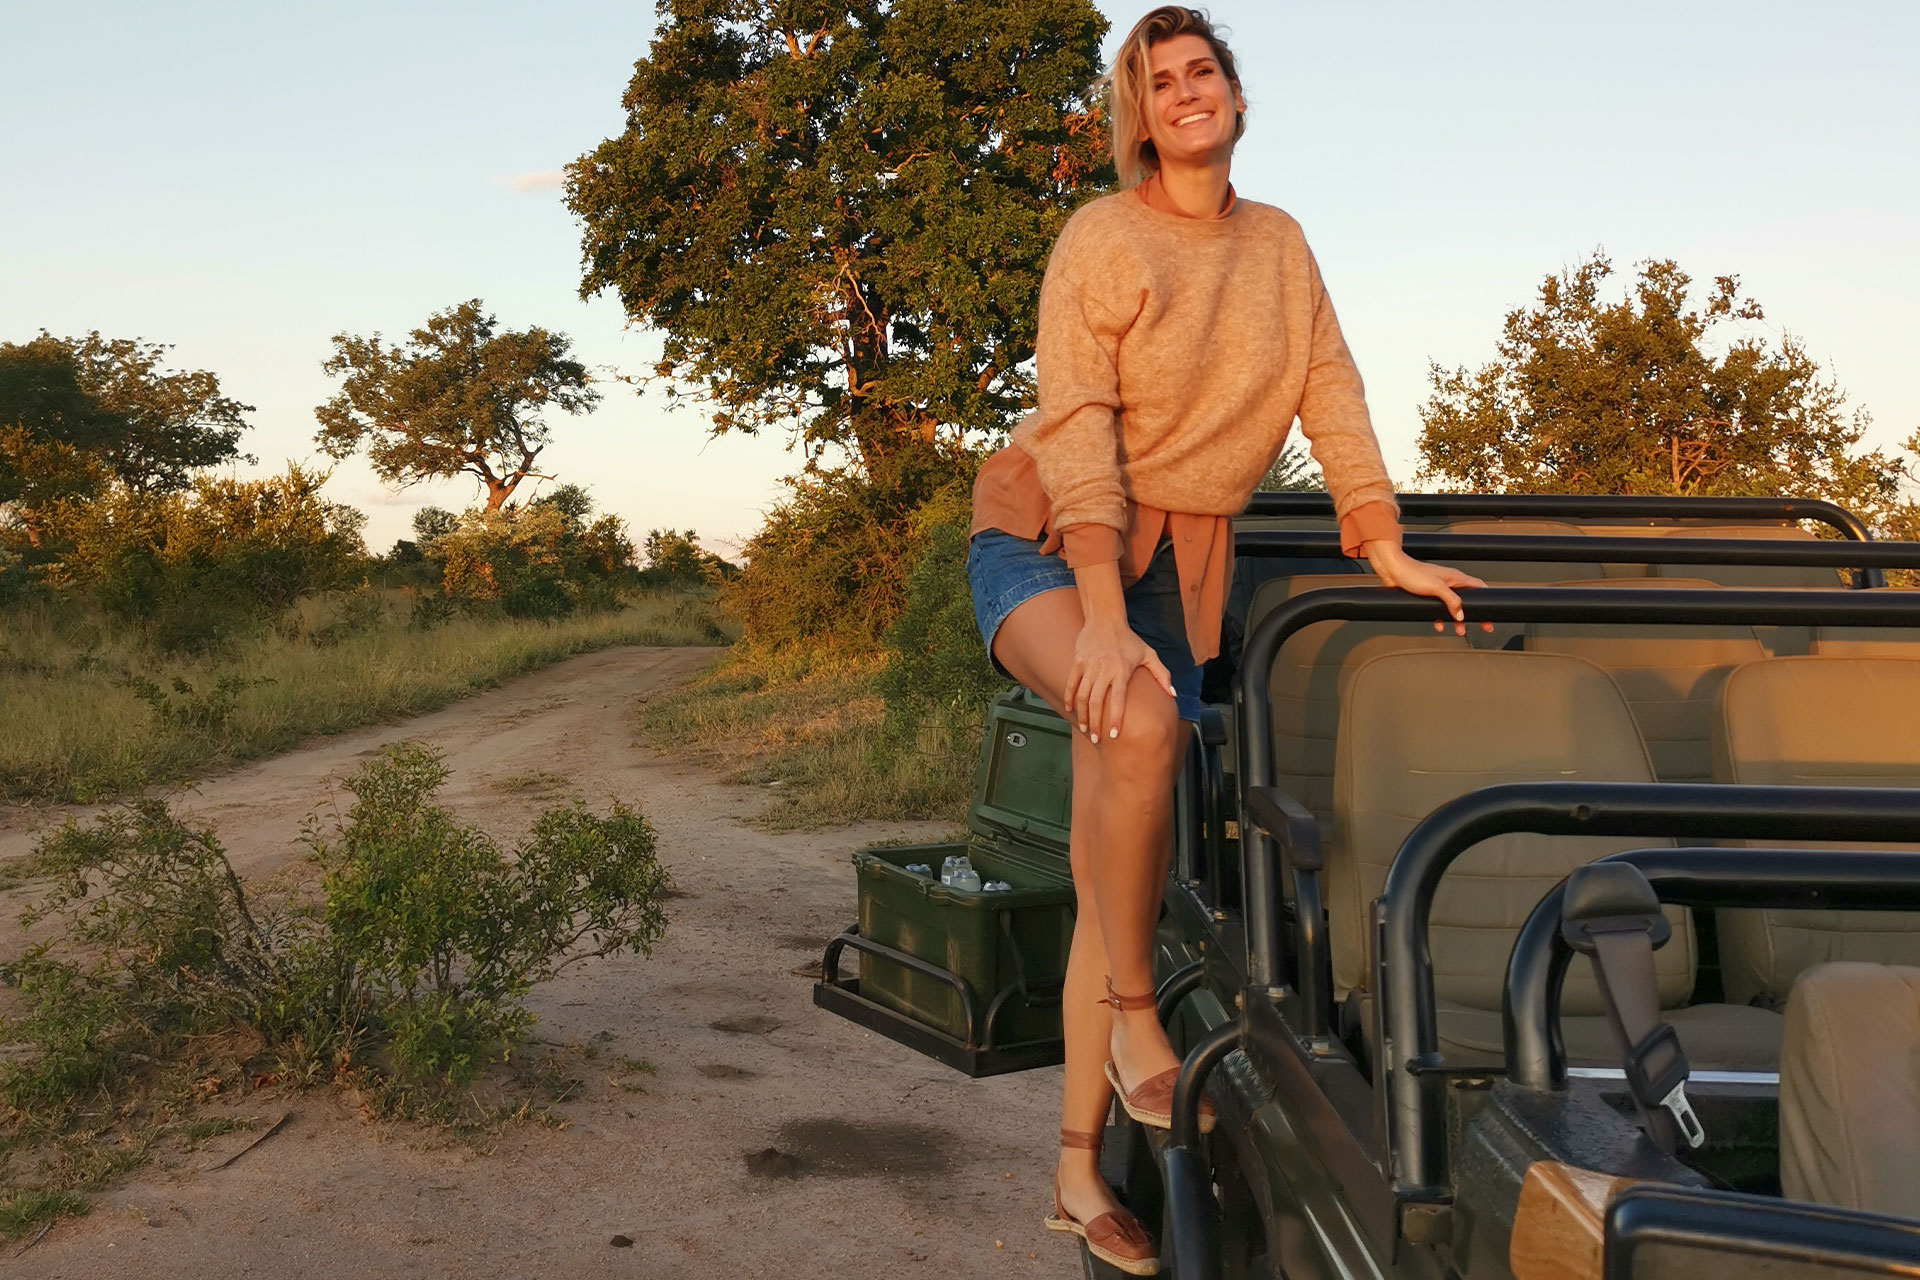 General Manager of Ker & Downey® Africa’s France DMC, Cynthia Deneux, posing next to a safari game vehicle at Thornybush, South Africa.